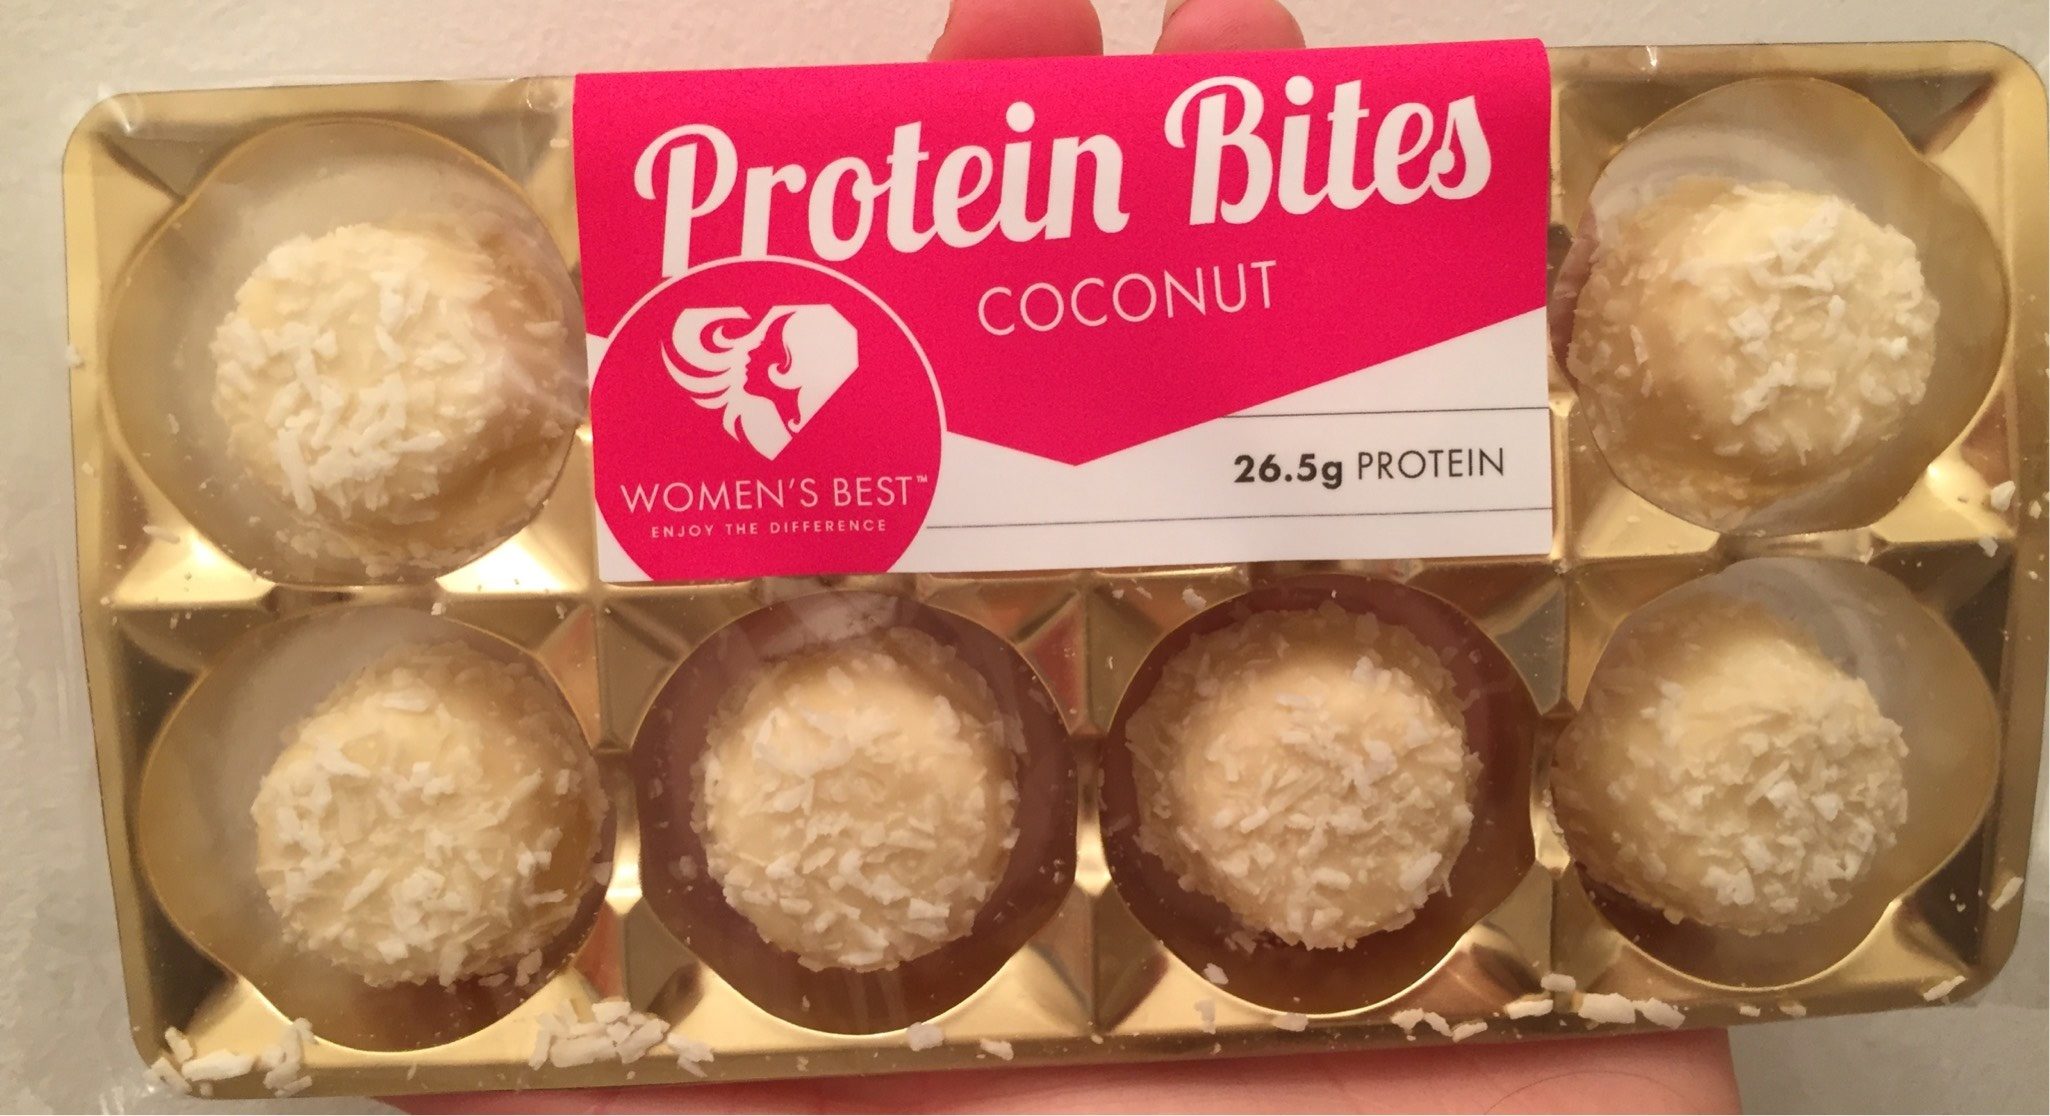 Protein bites coconut - Product